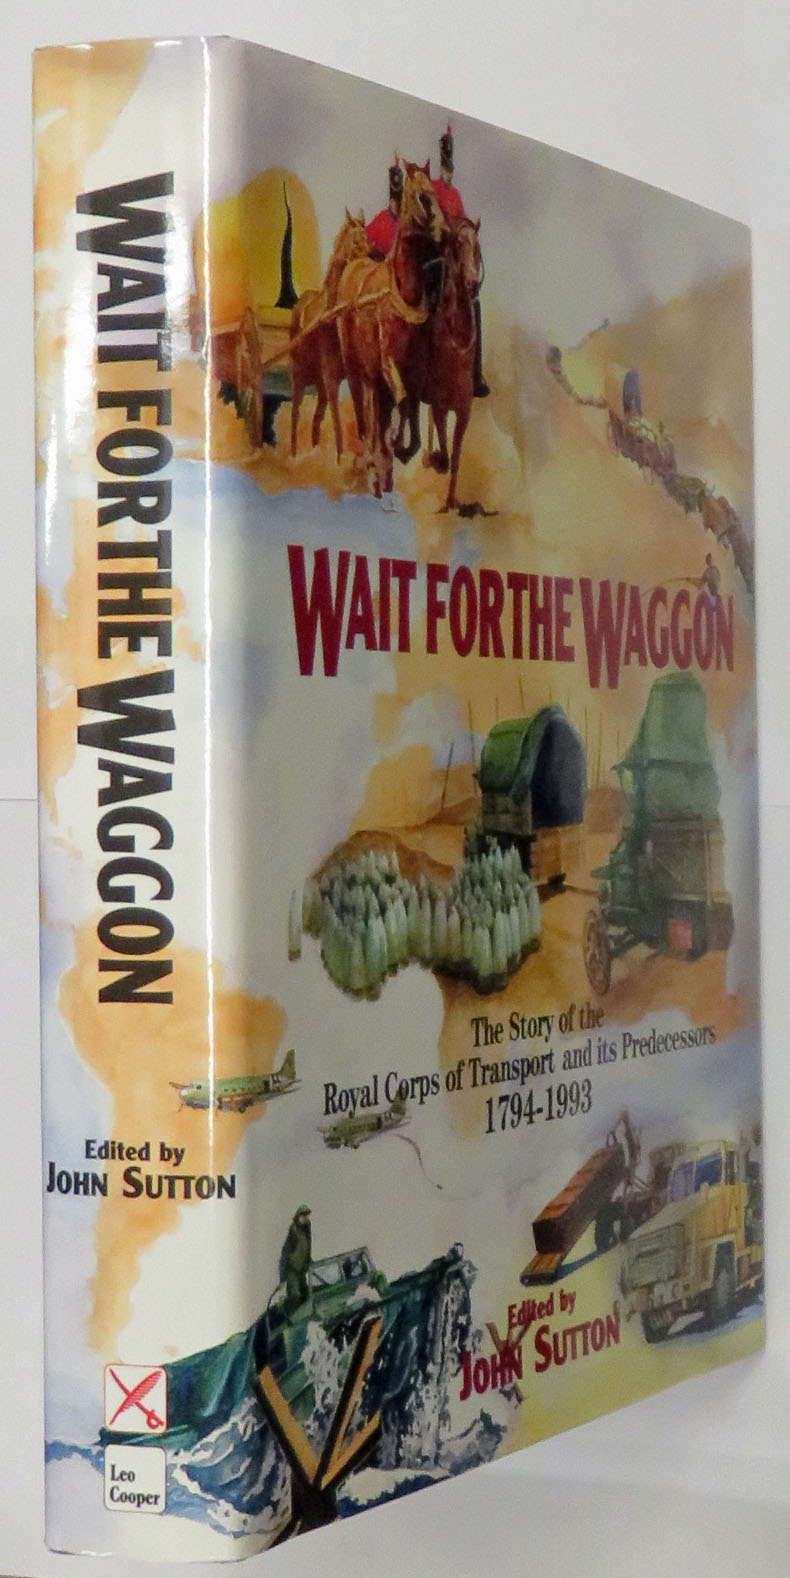 Wait For the Waggon The Story of the Royal Corps of Transport and Its Predecessors 1794-1993